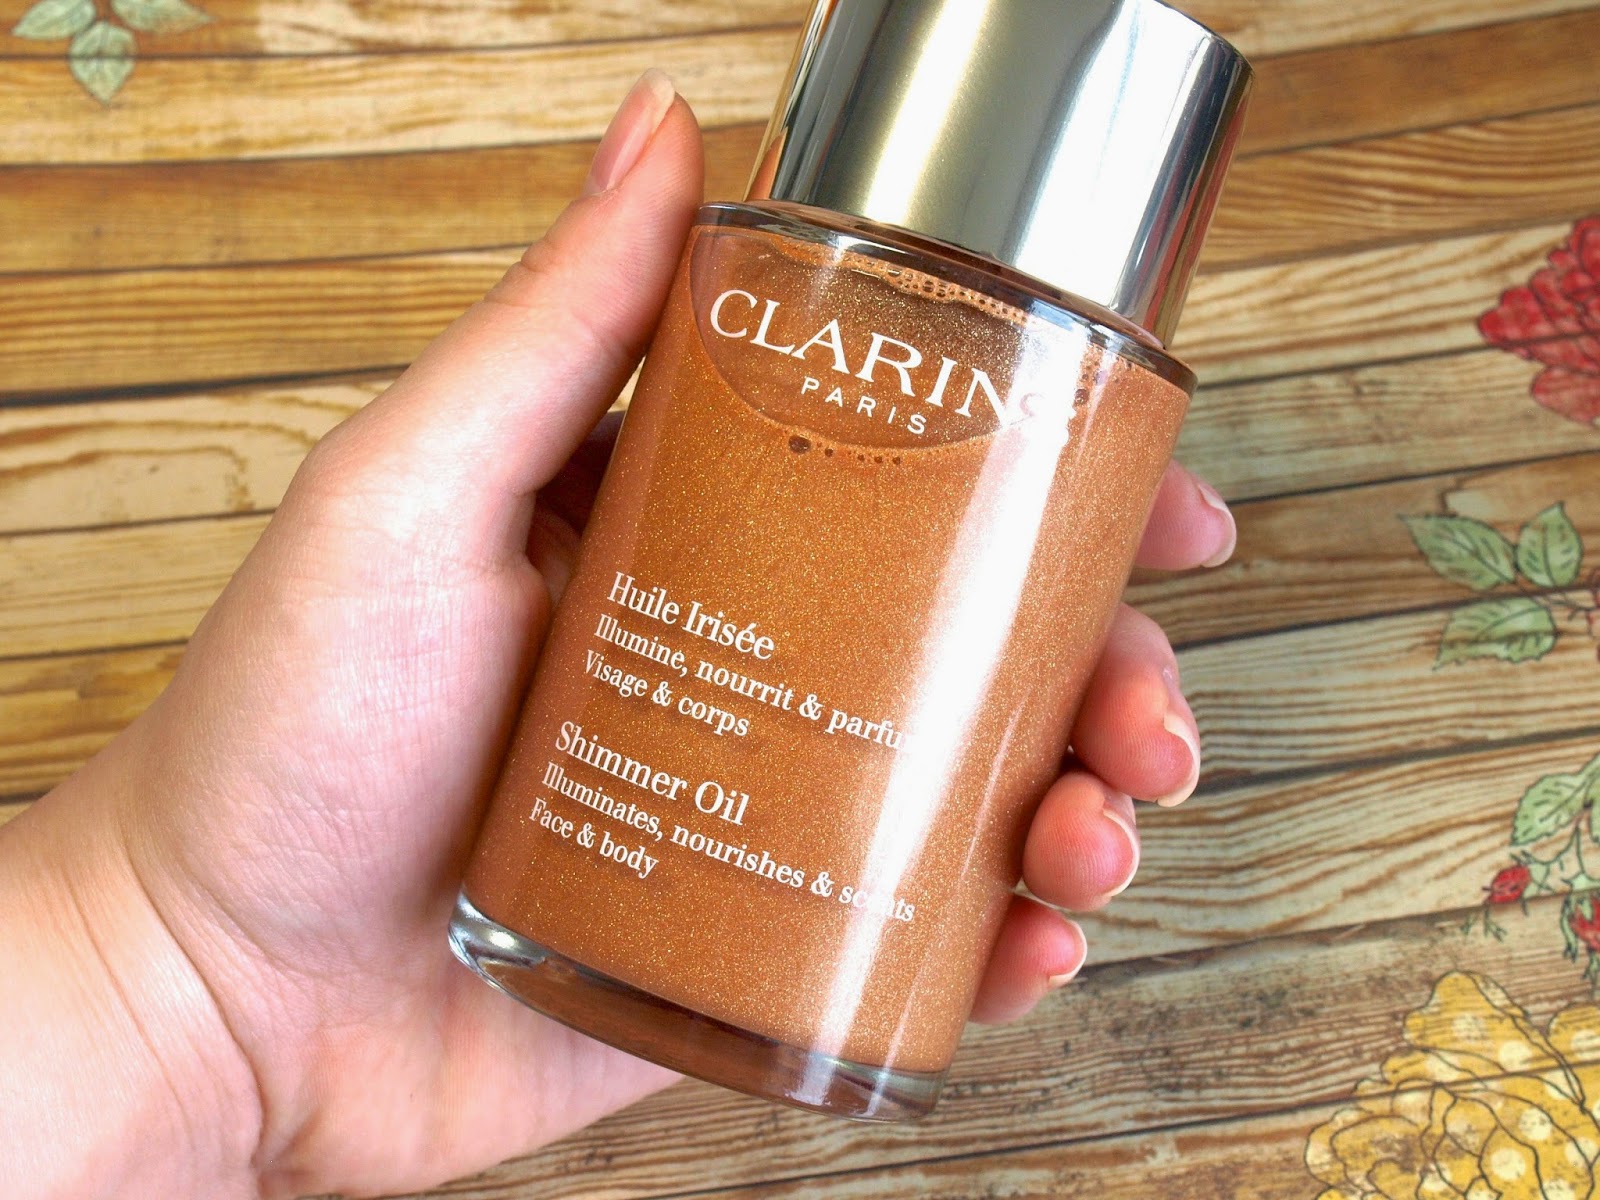 Clarins Shimmer Oil